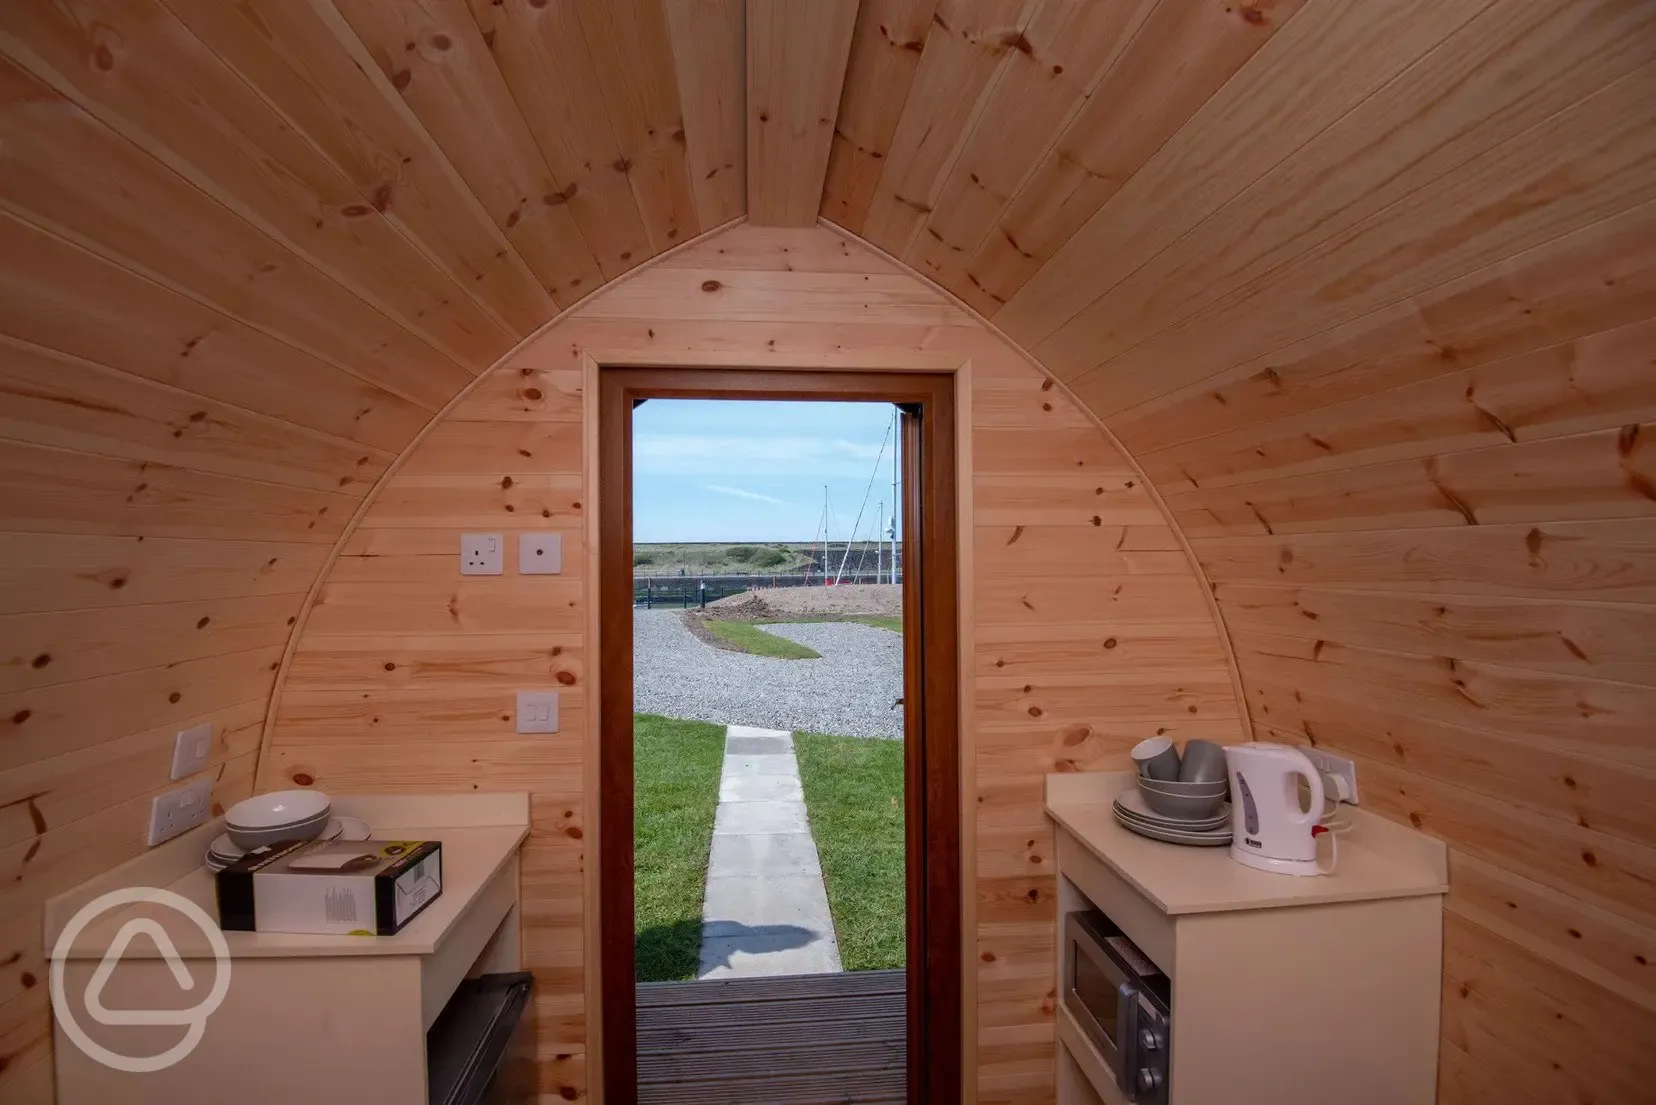 Camping pods (pet friendly) interior